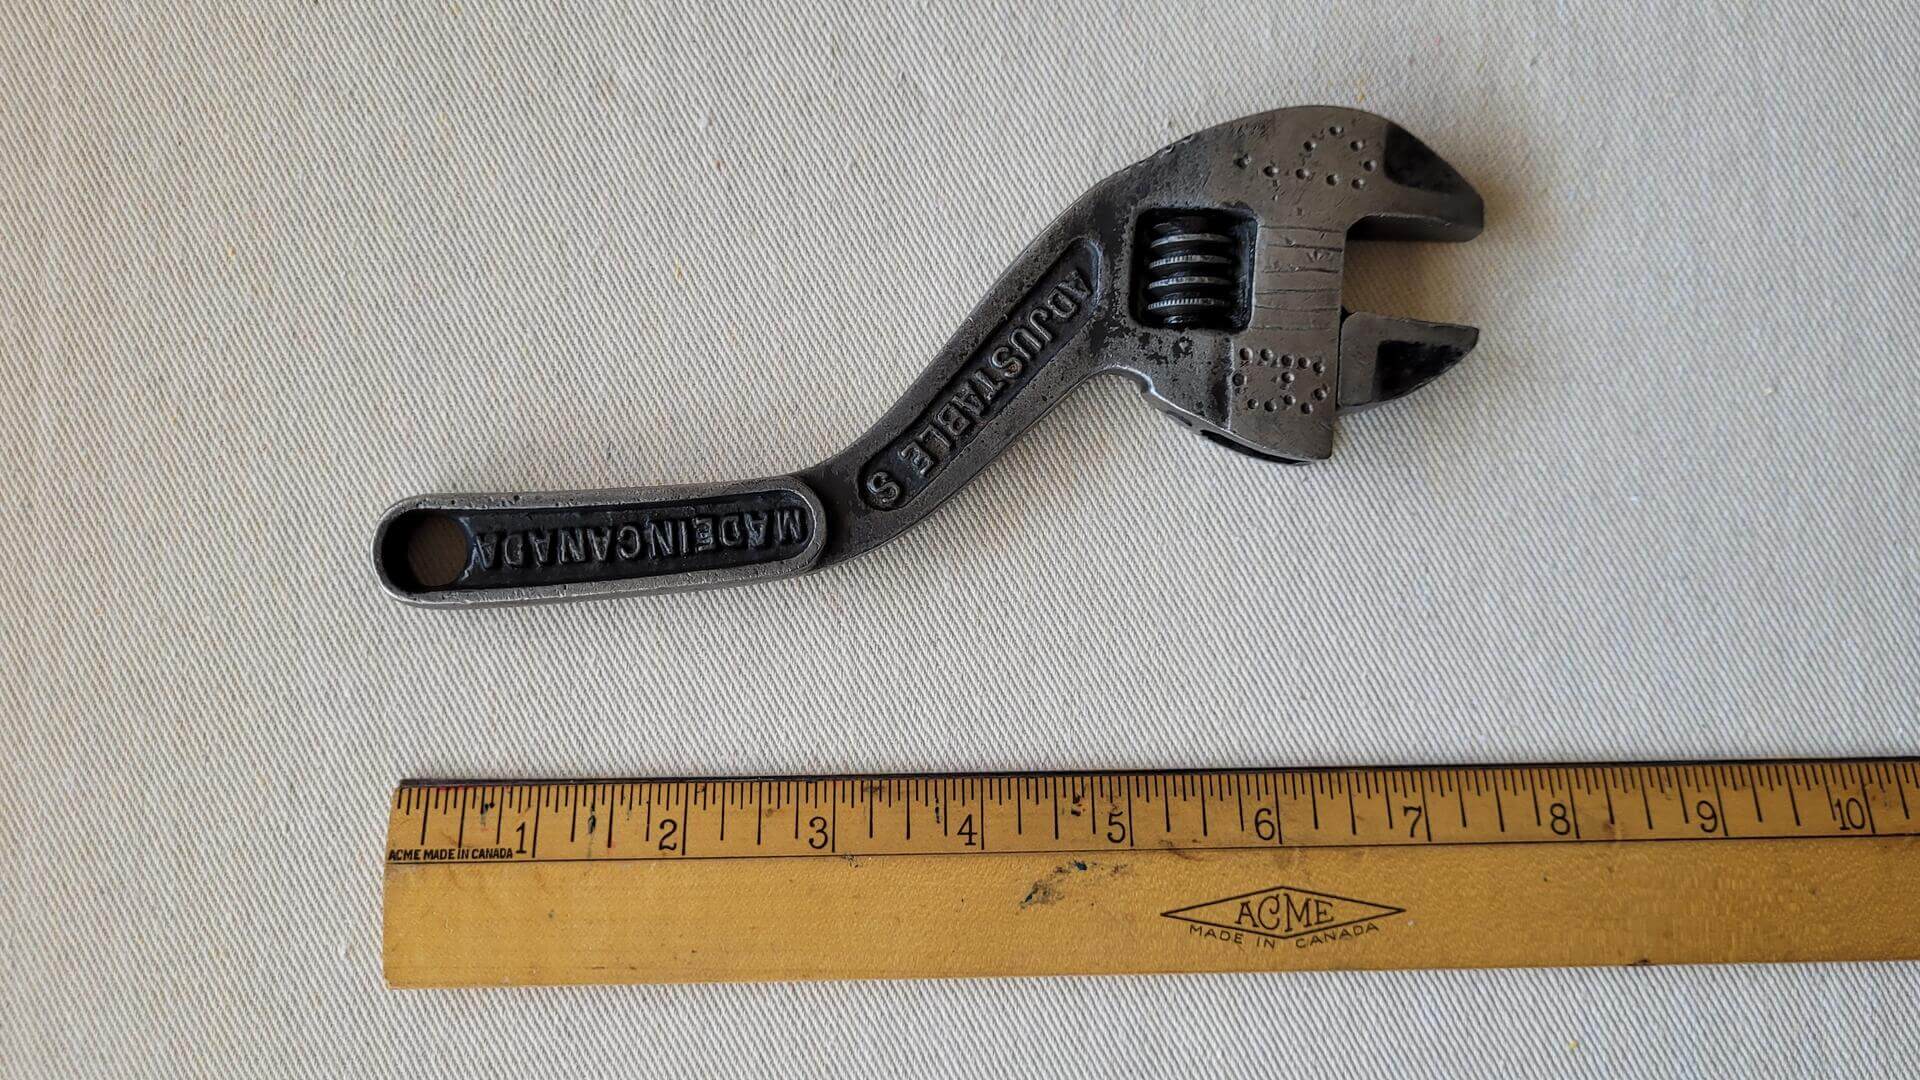 Rare antique 8 inch S curved adjustable wrench forged by McKinnon Industries from St. Catharines, Ontario. Vintage made in Canada collectible plumbing and automotive hand tools